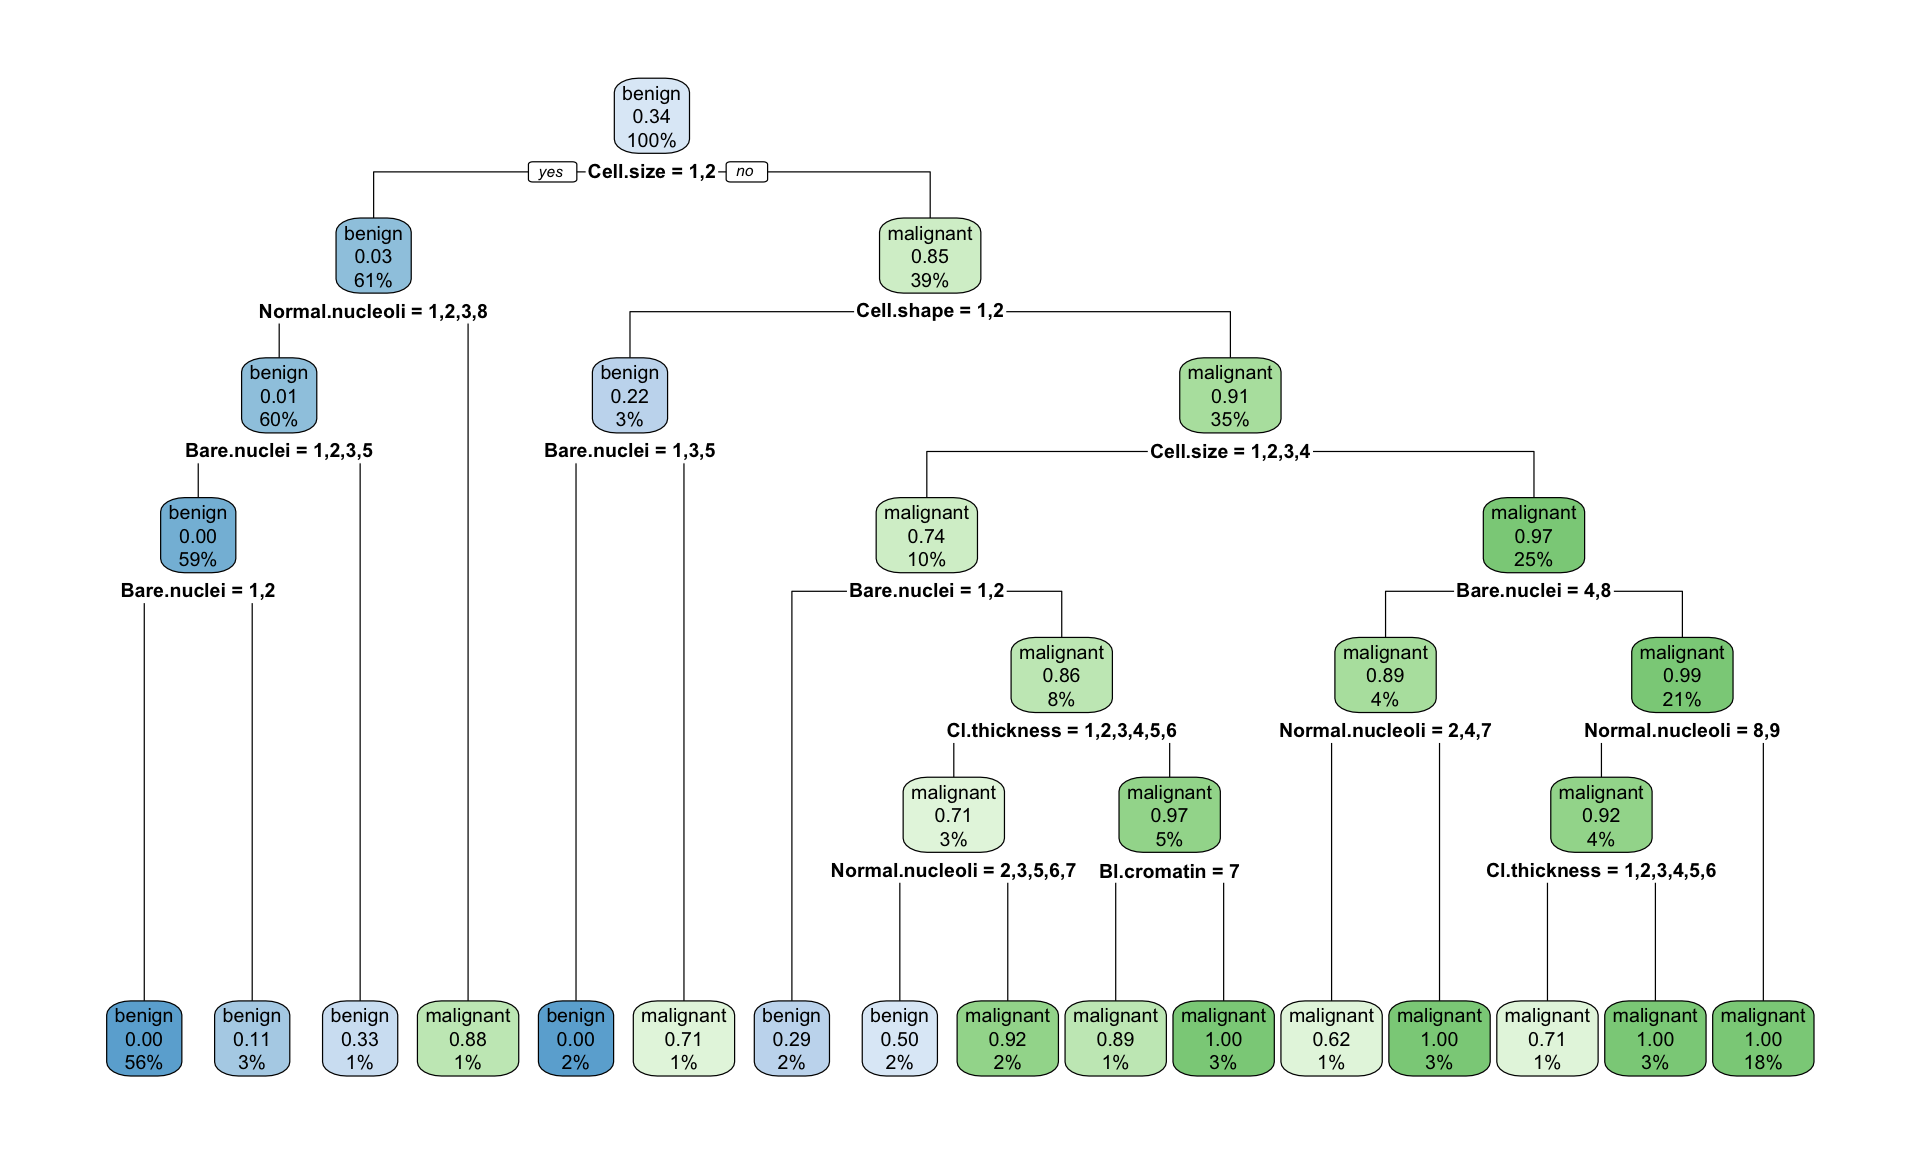 Example of the decision tree classifying tumour into bening and malignant type with rpart(), fully grown tree